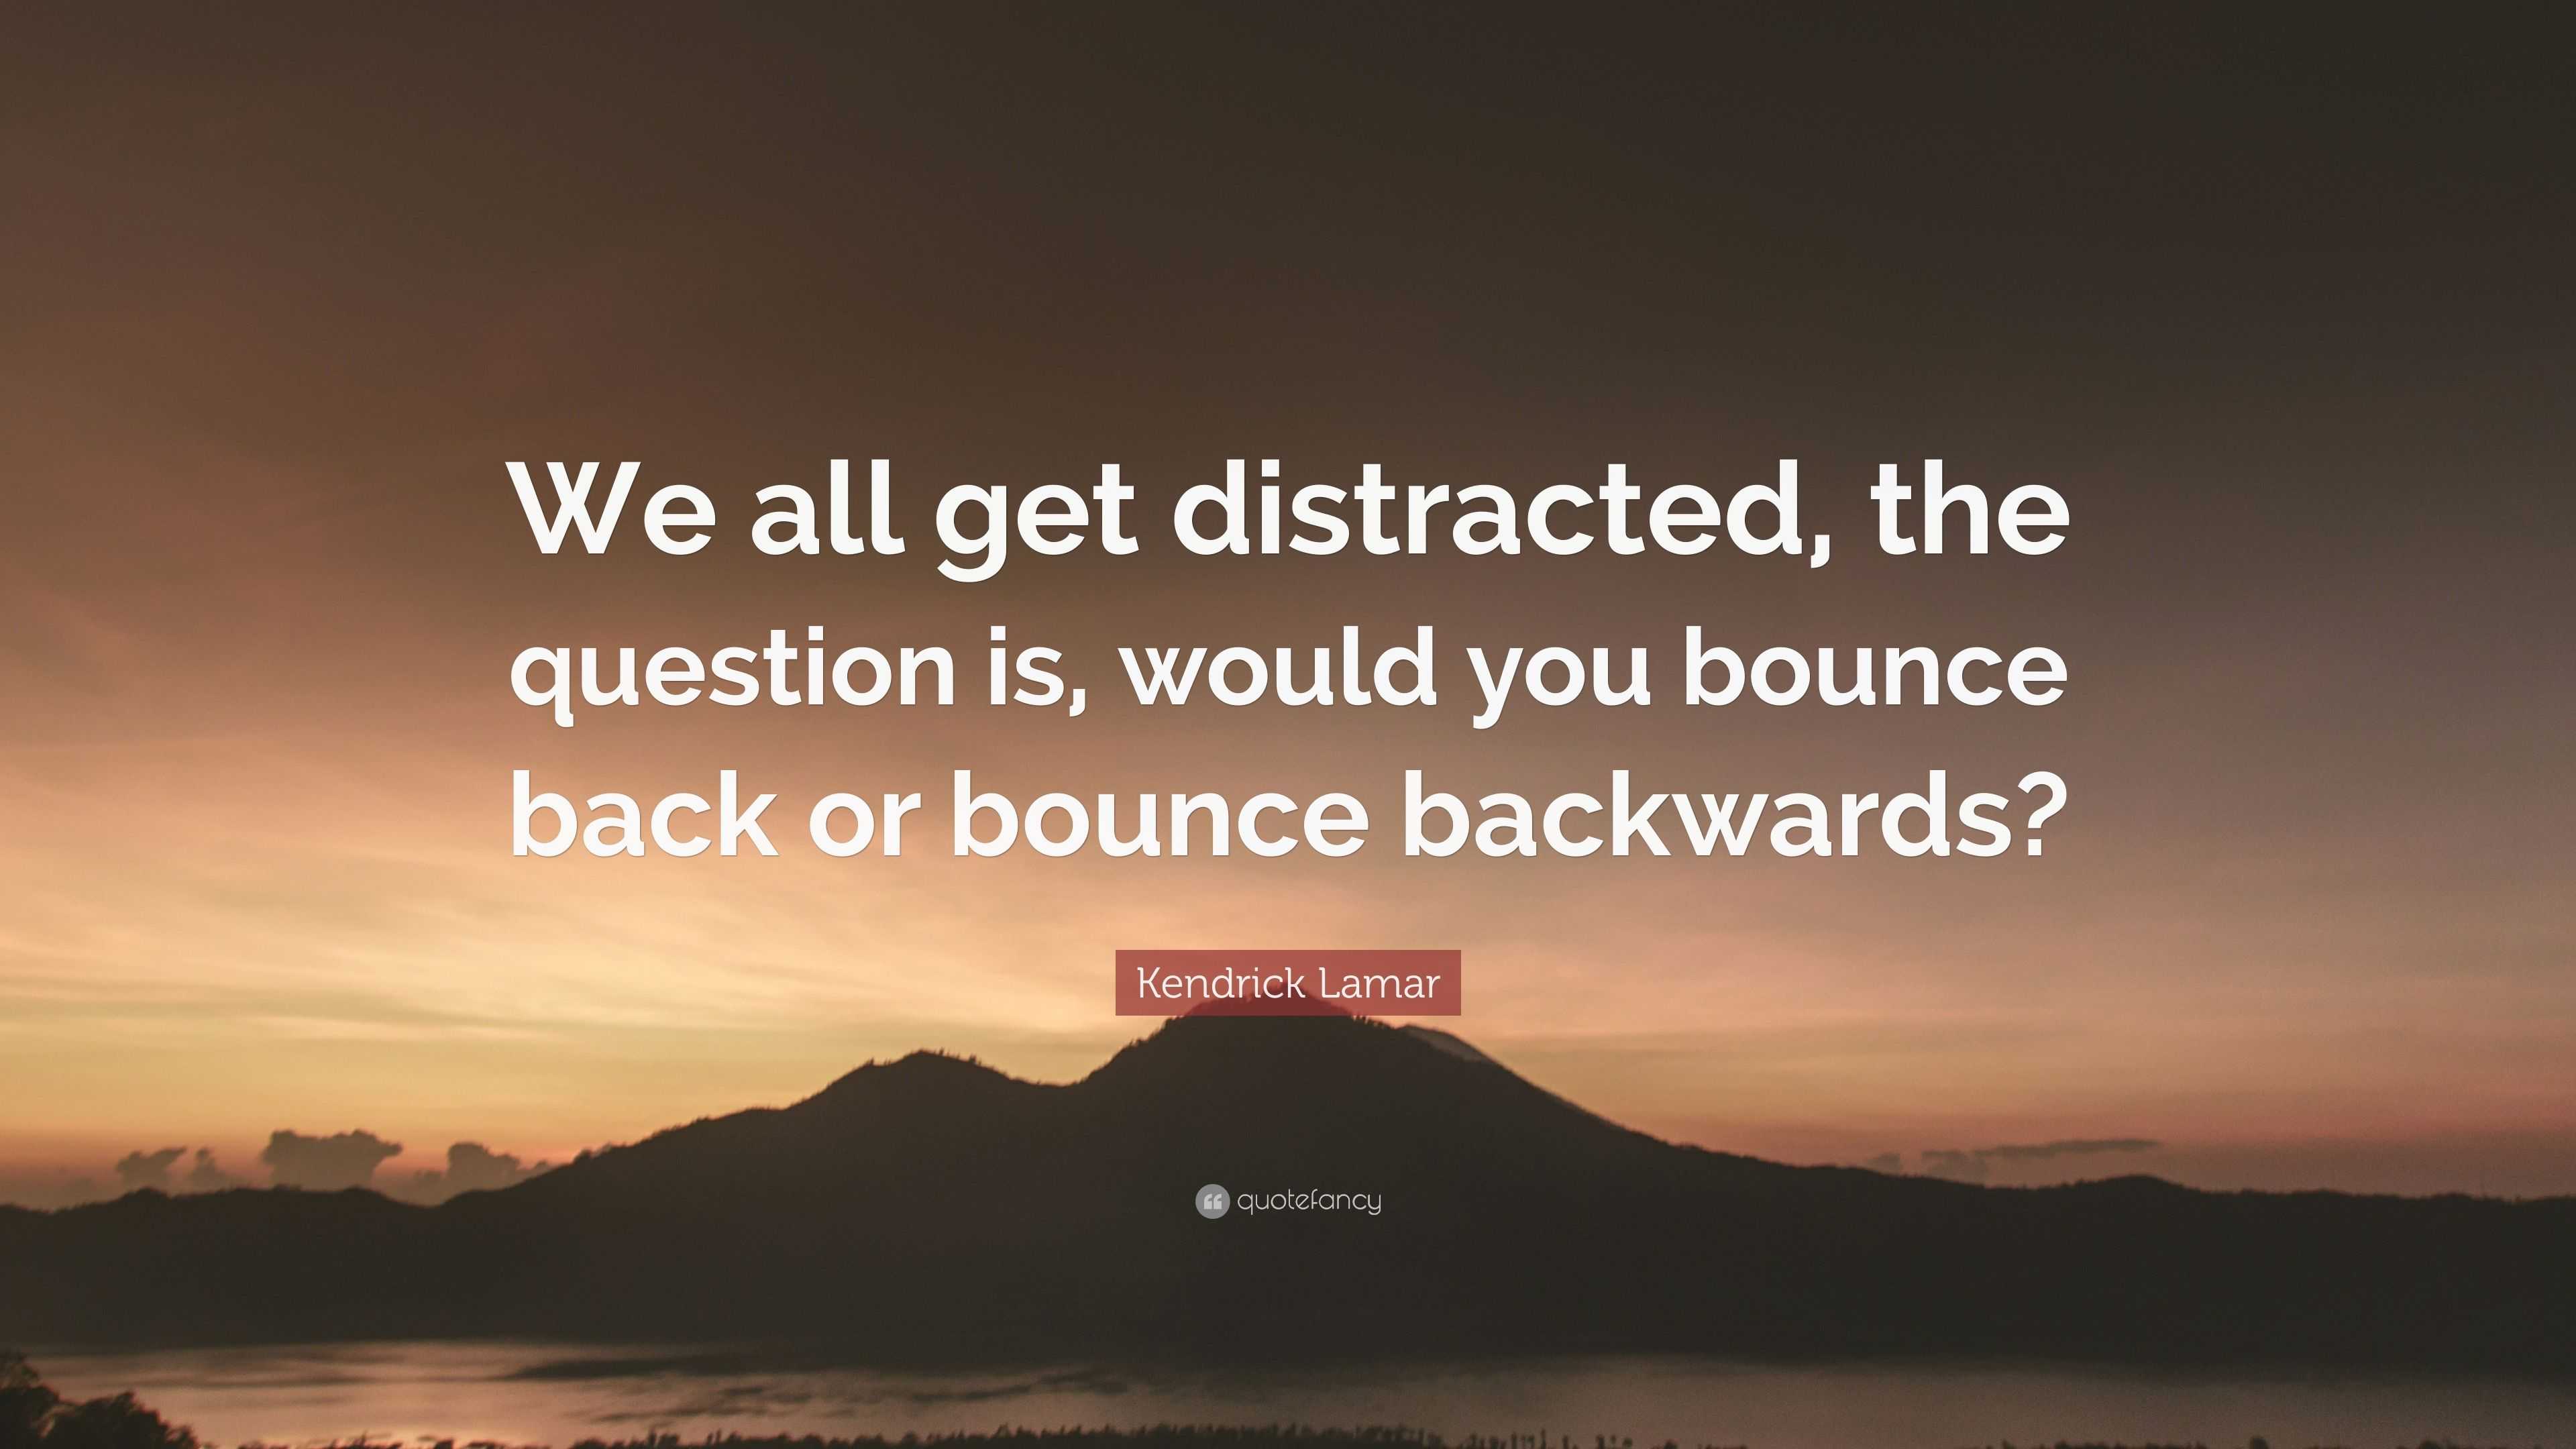 Kendrick Lamar Quote: “We all get distracted, the question is, would